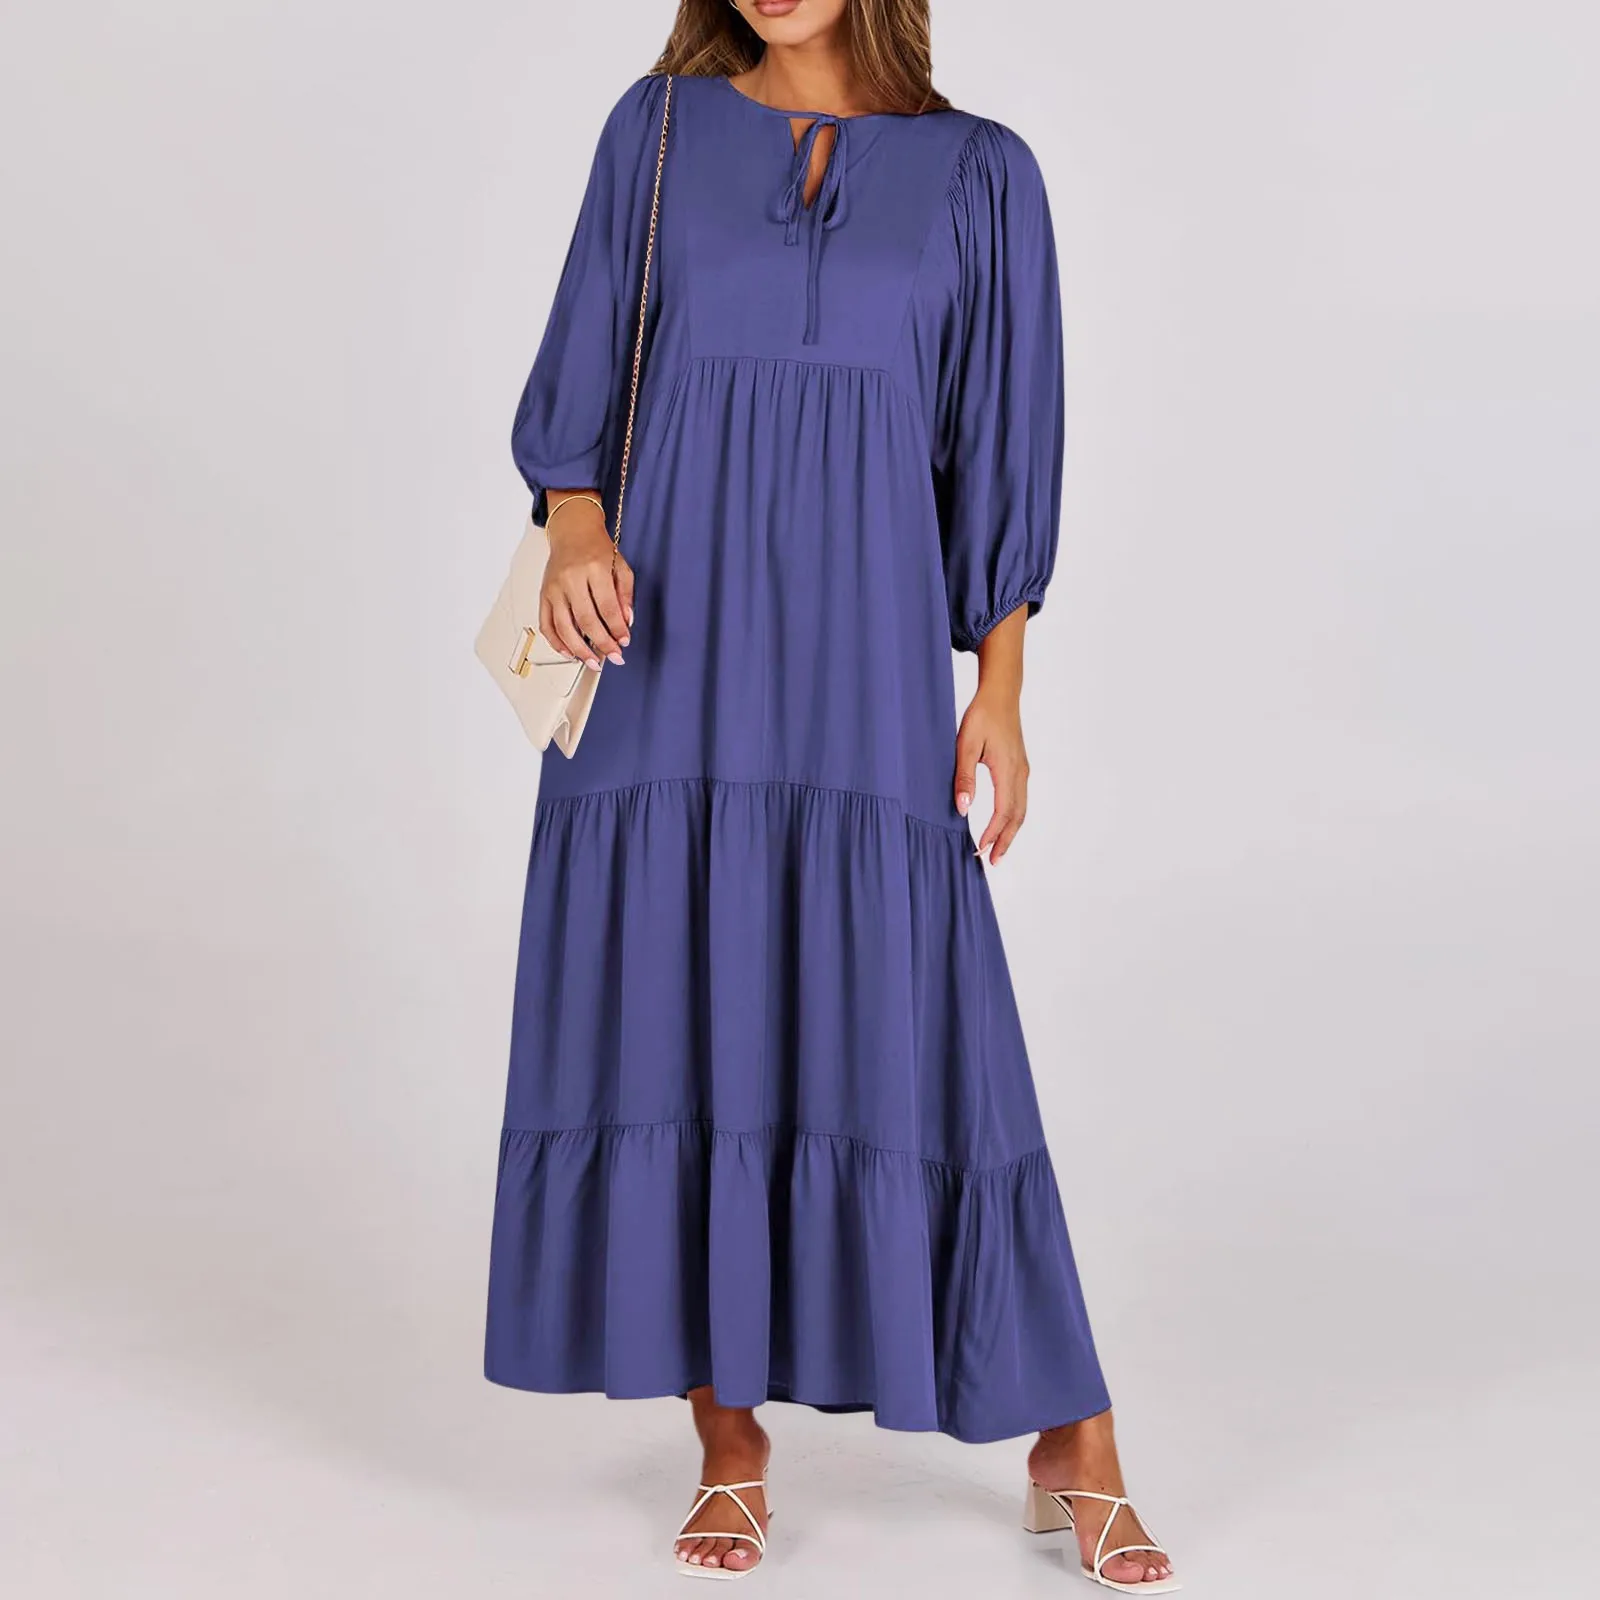 

Hollow Out Lace Up Elegant Long Dress Women Round Neck Loose Casual Dresses Seven Quarter Sleeve Solid Color Pleated Dress